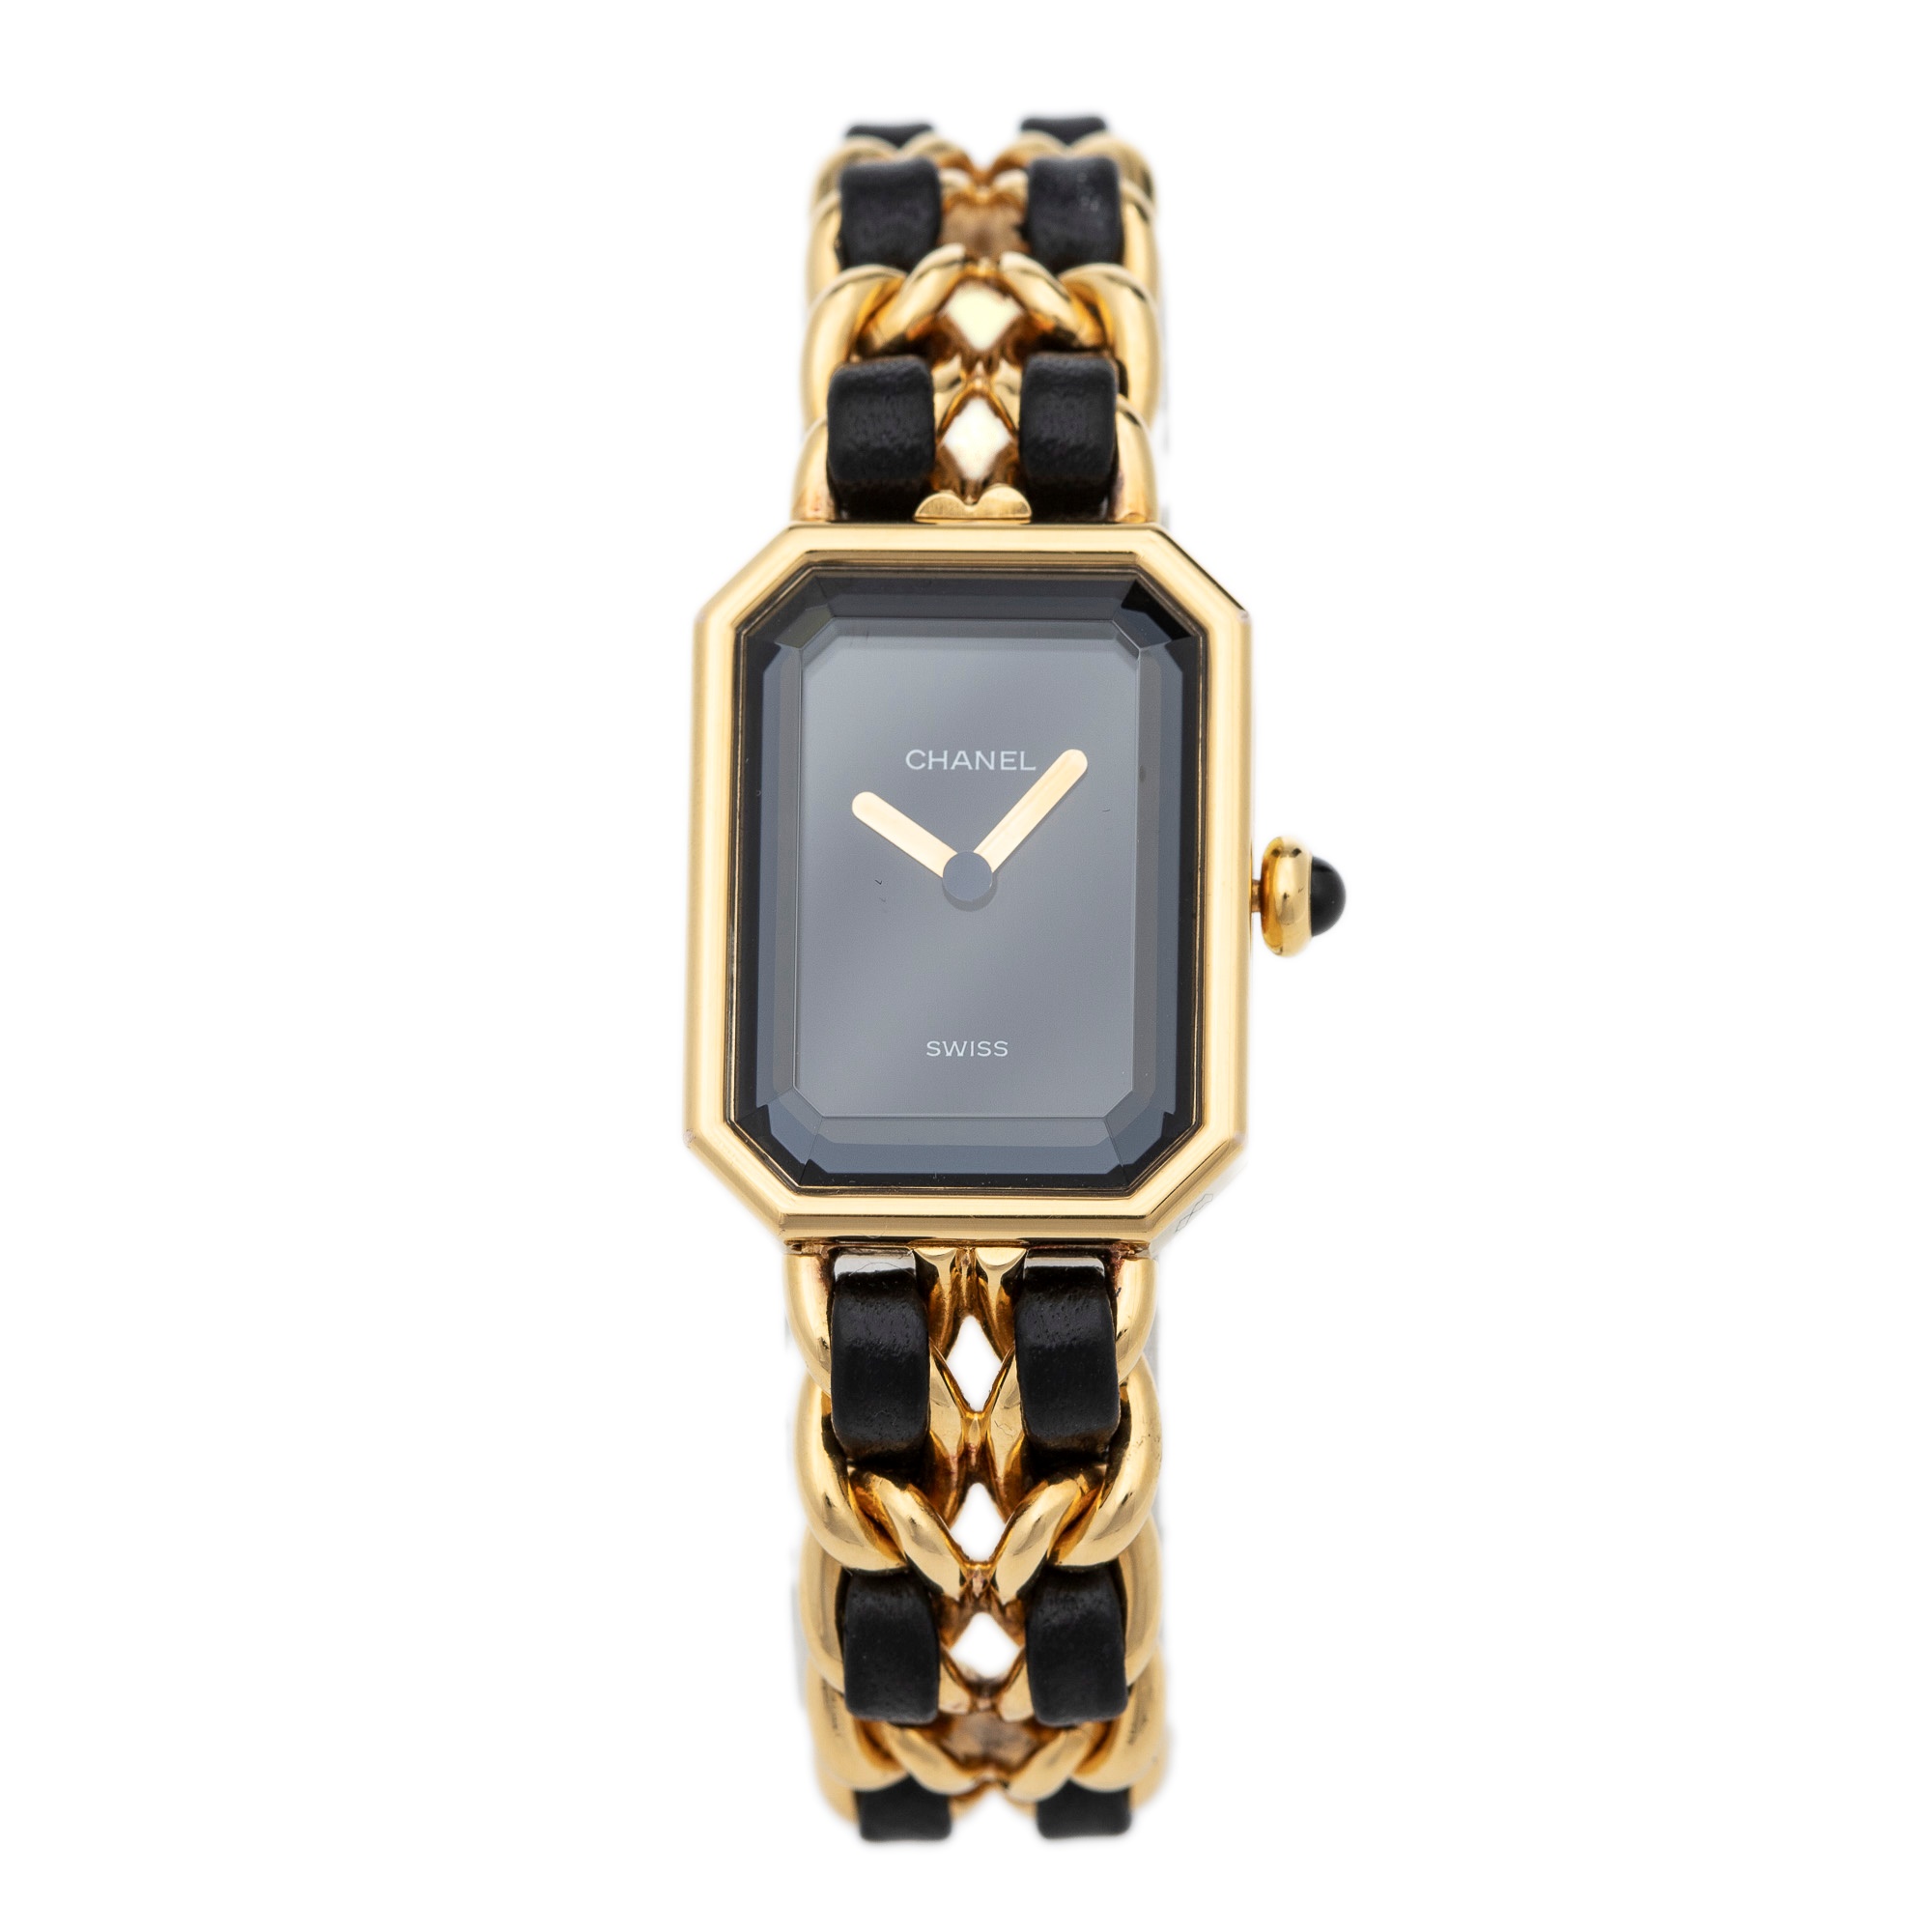 Chanel Premiere Watch, gold plated with black leather woven chain strap ...